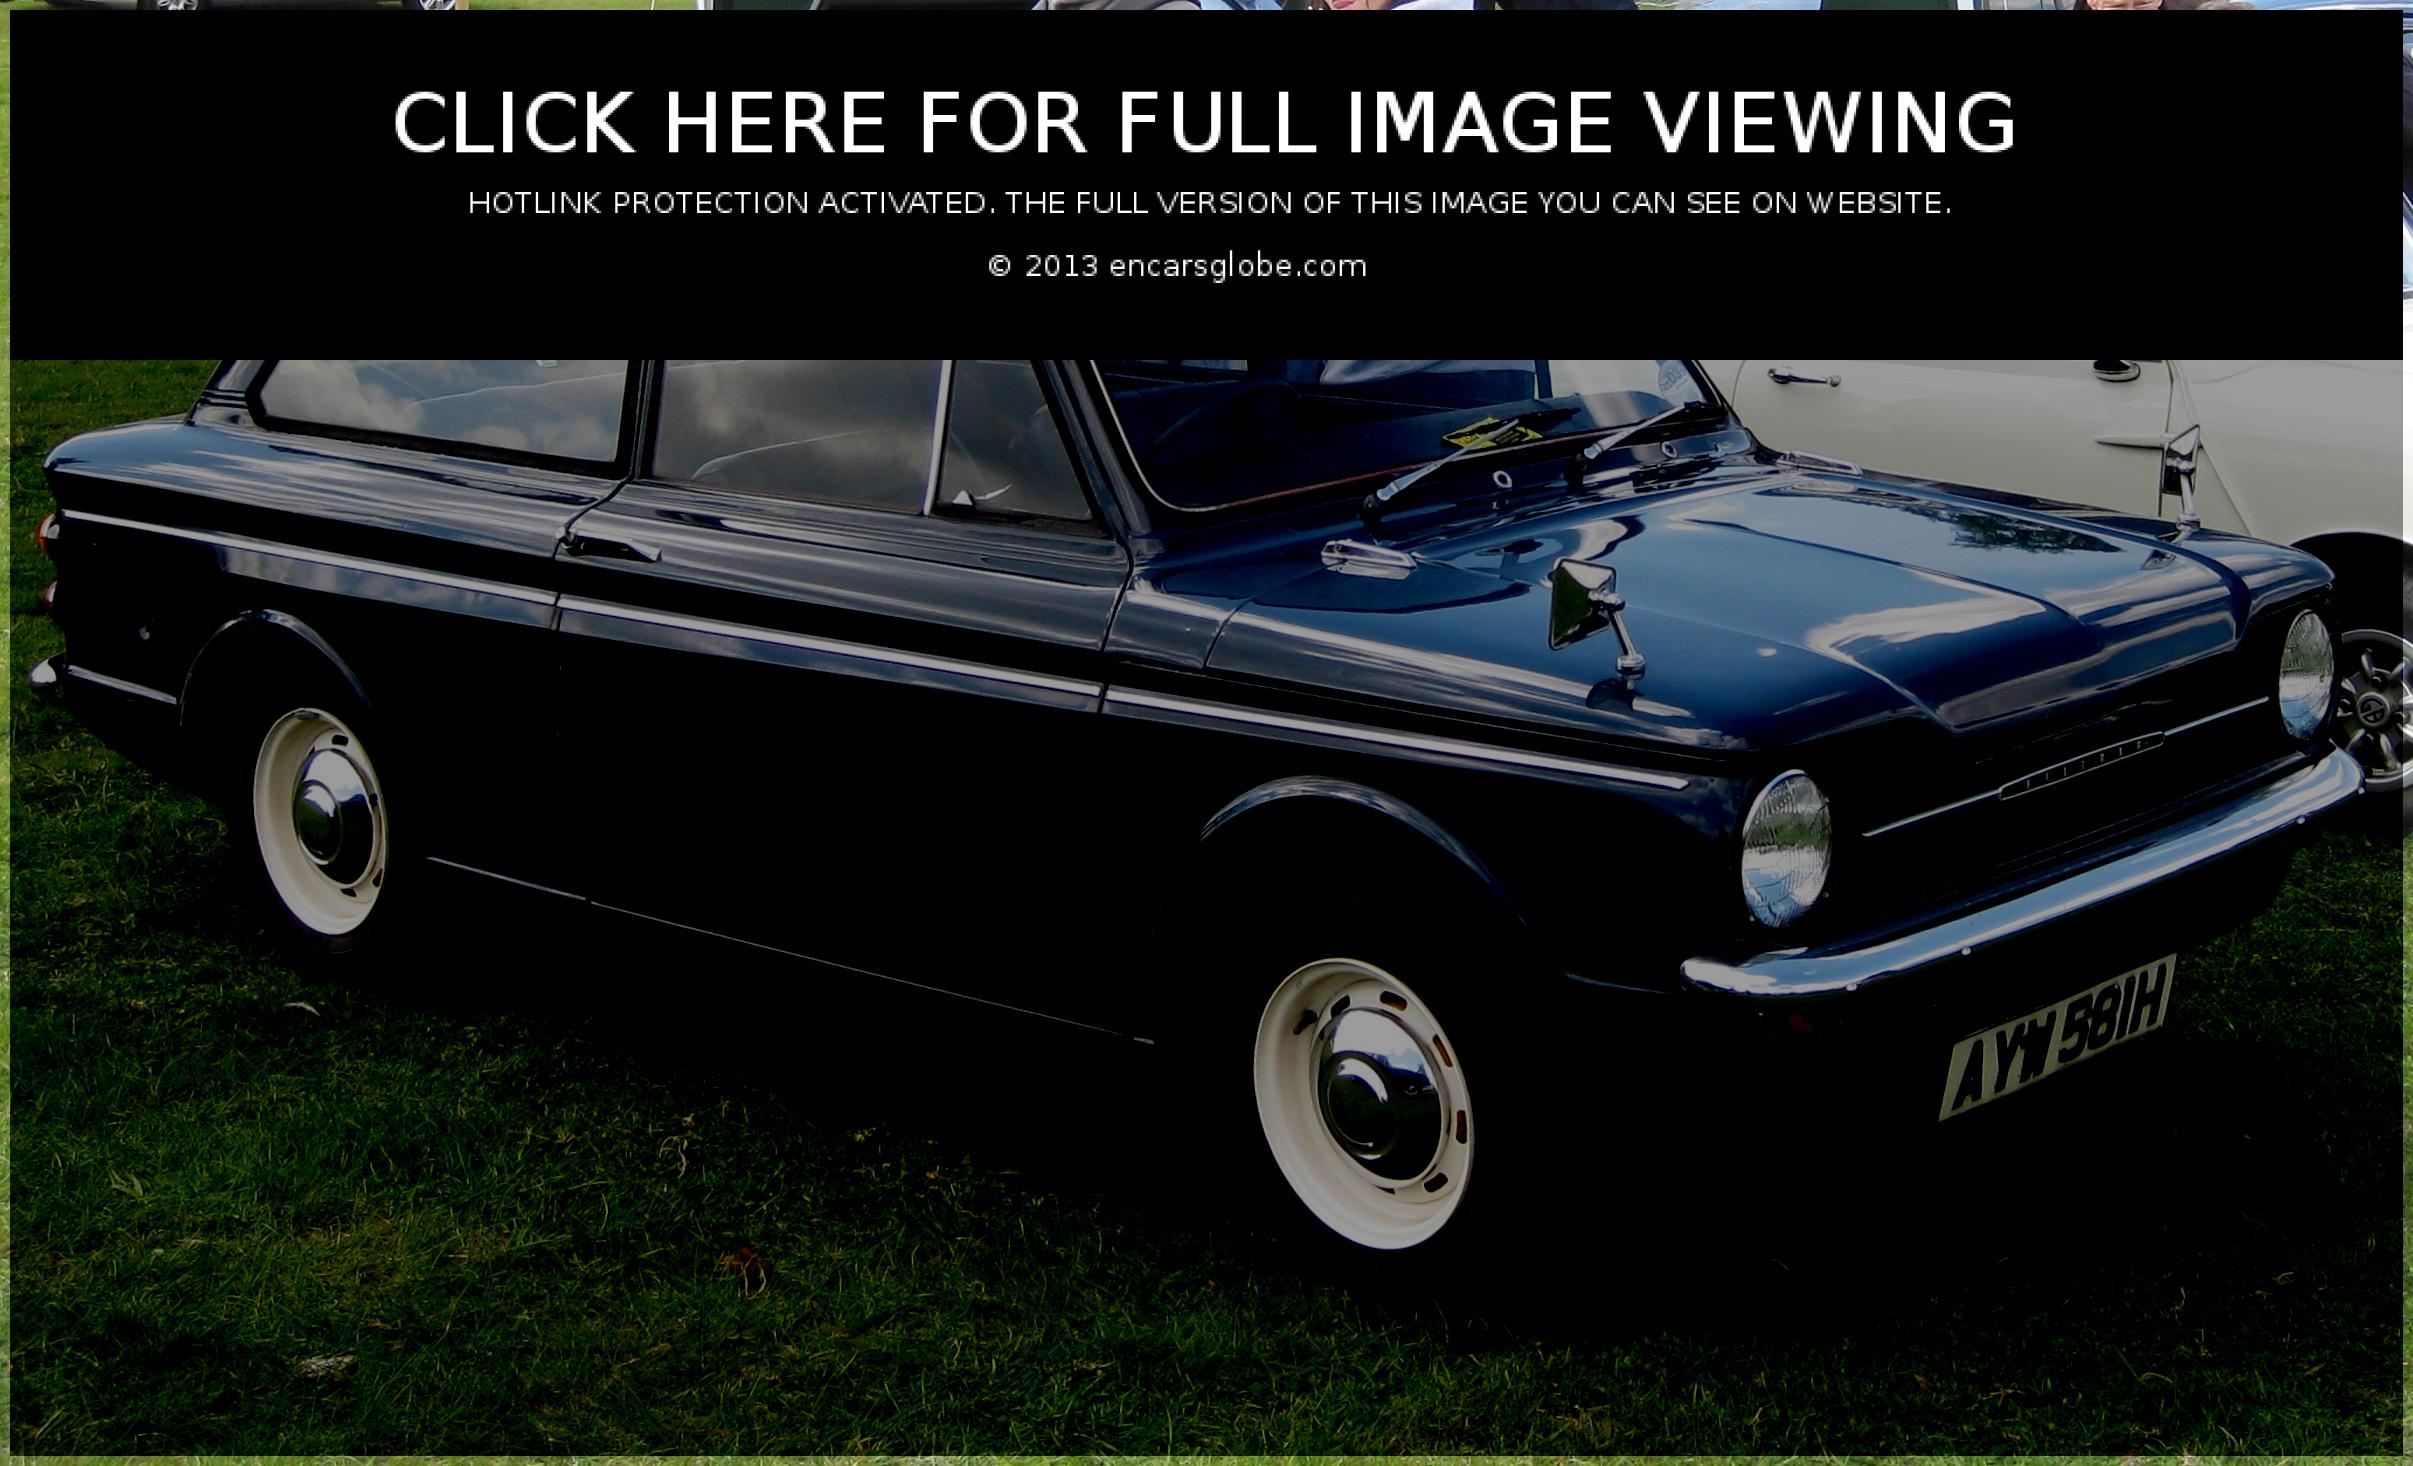 Hillman Imp 875: Photo gallery, complete information about model ...